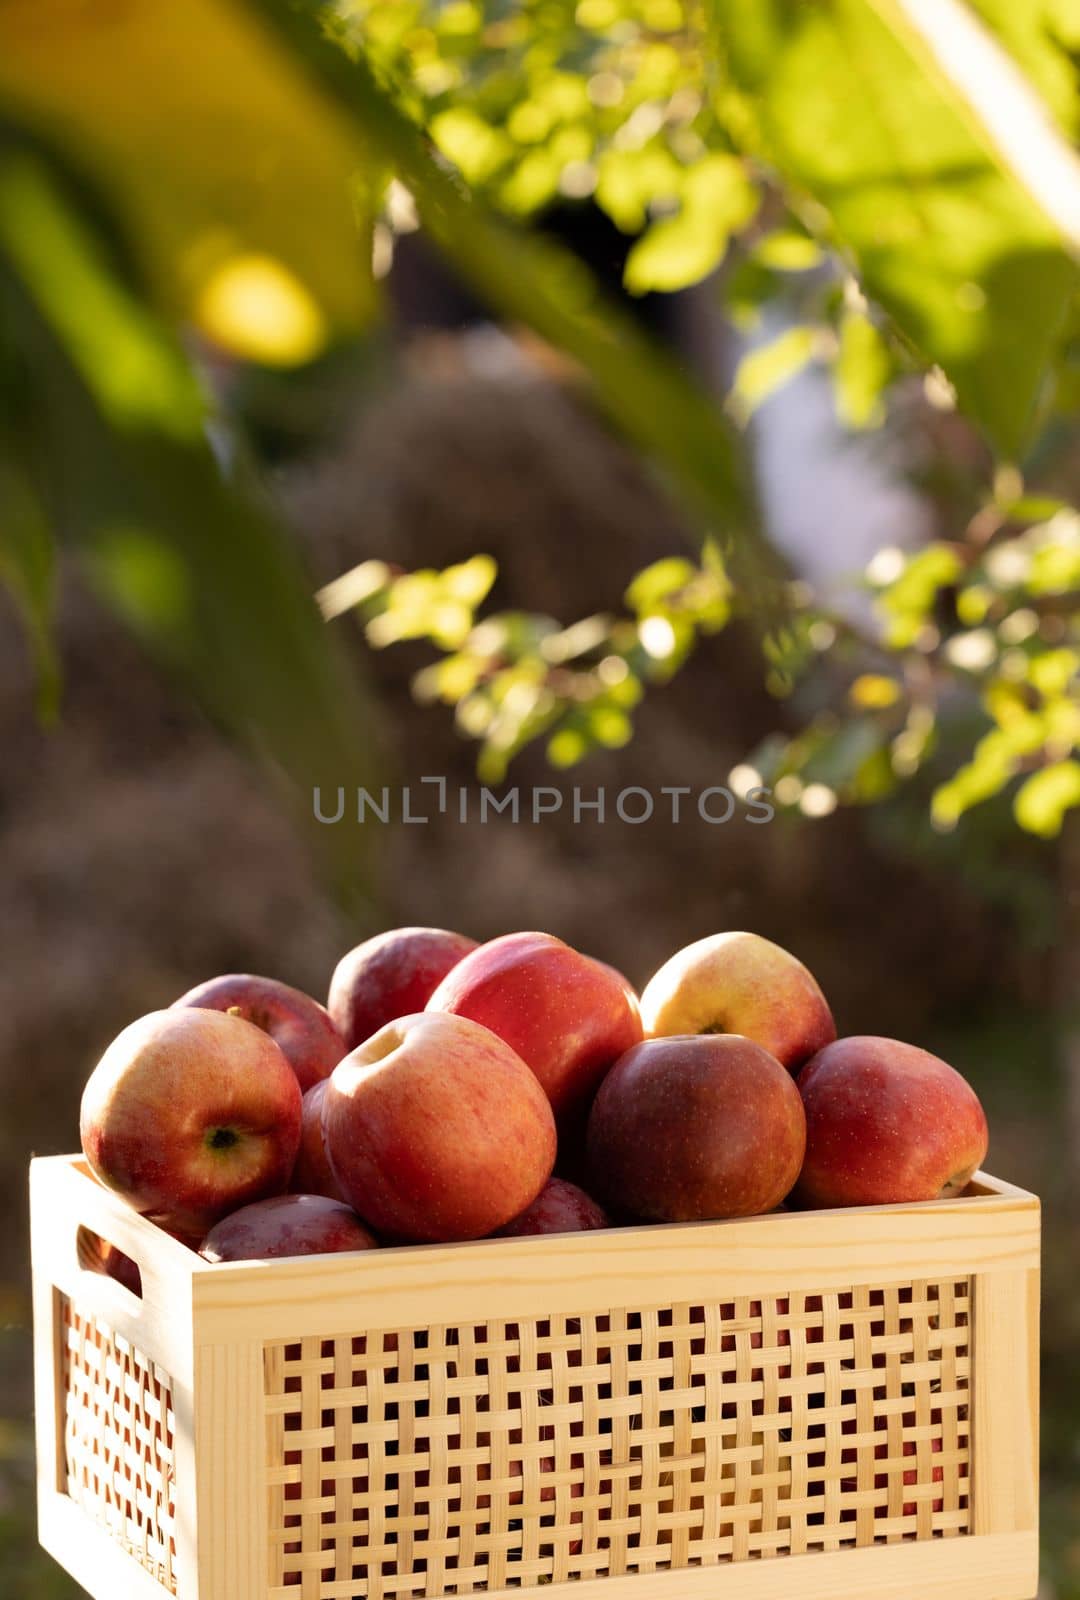 Apple harvesting. Organic fruit. Apple farming. Wooden box with red, ripe, freshly picked, juicy, selective apples. Picking apple harvest. Gardening. Organic food. by uflypro